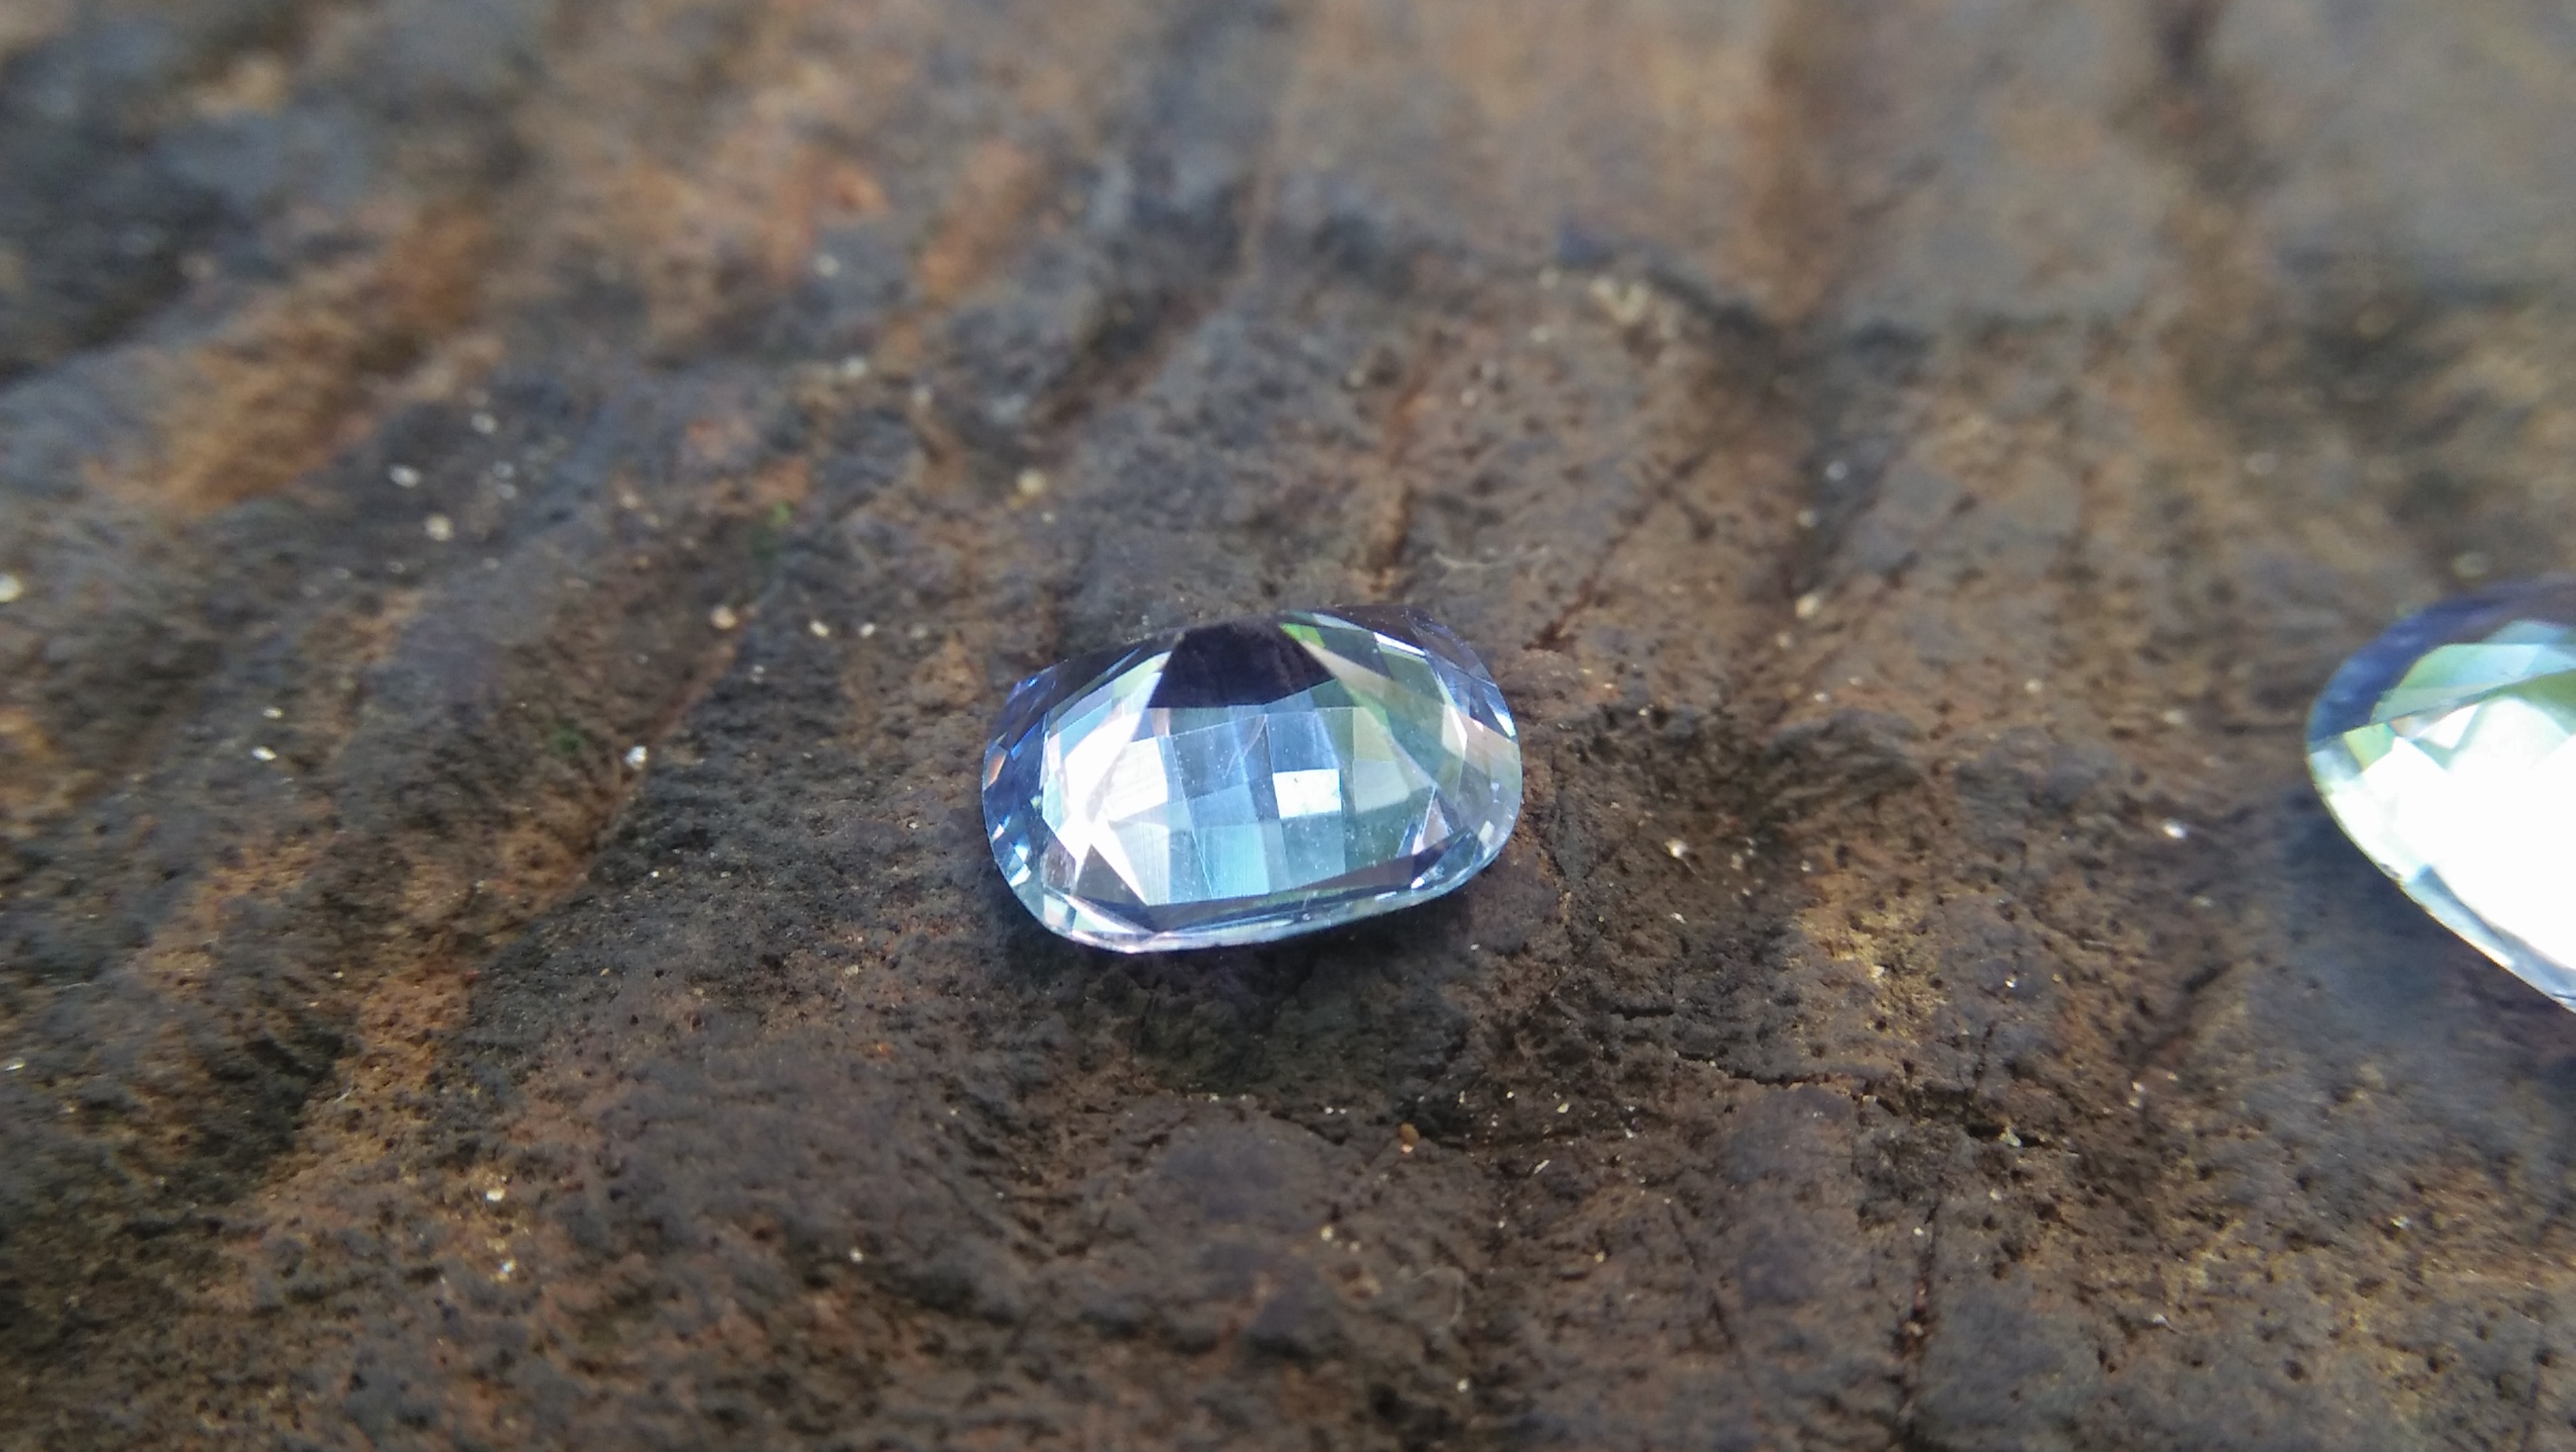 NATURAL BLUEISH WHITE SAPPHIRE Shape : Cution Dimension : 7.2mm x 6mm x 3.5mm Weight : 1.35cts Clarity : Clean Colour : Blueish white Transparency : Transparent Origin : Sri Lanka Treatment : Unheated/ Natural